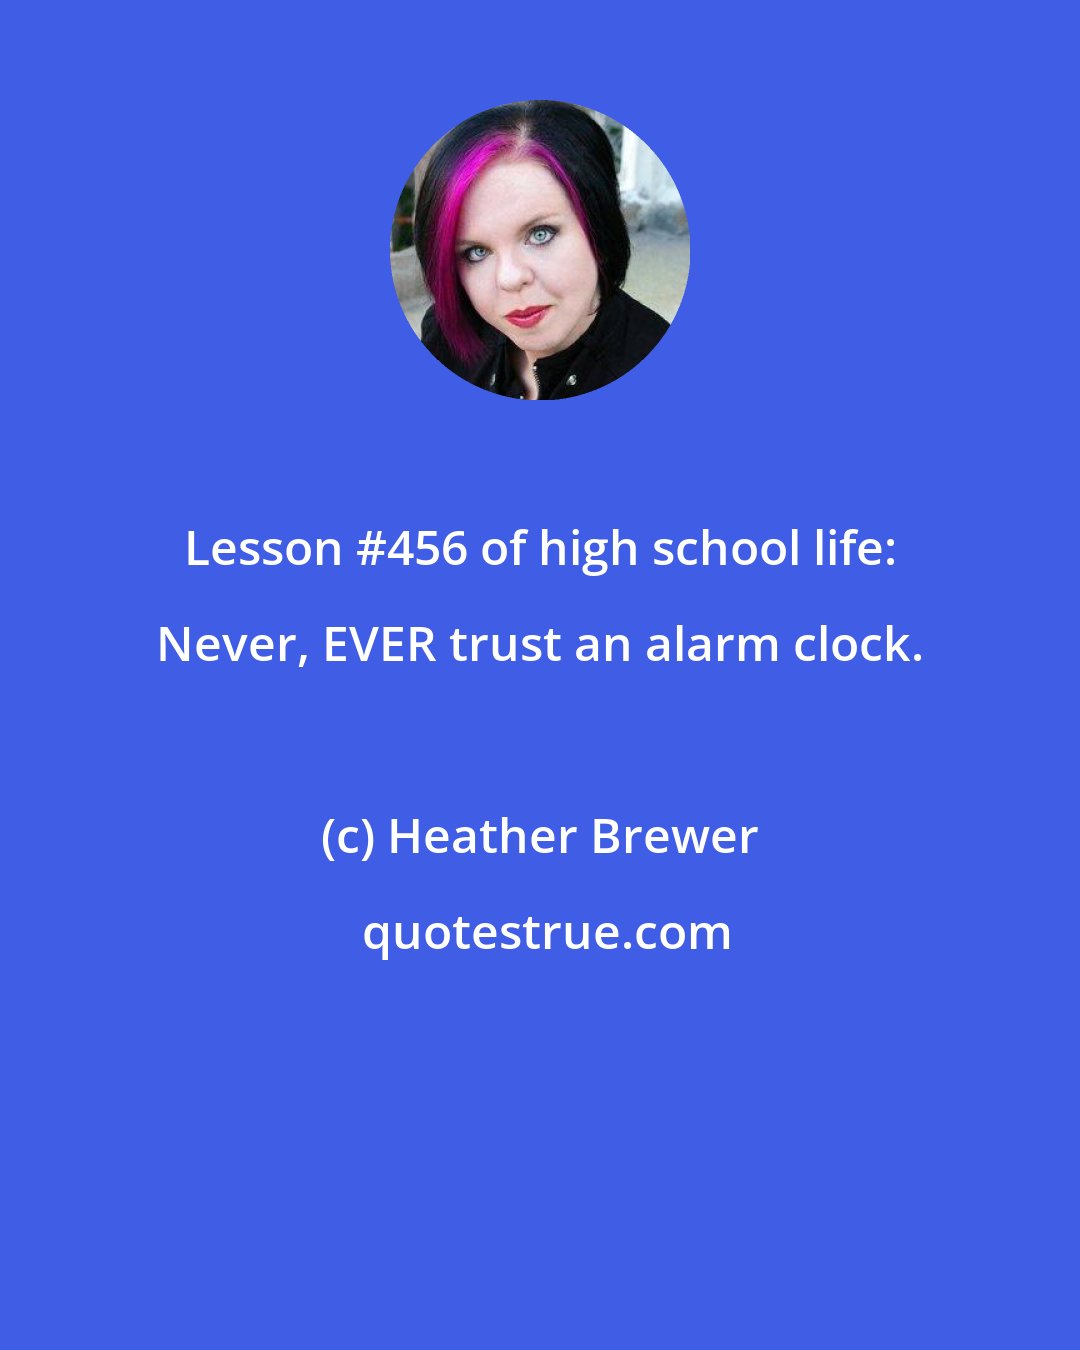 Heather Brewer: Lesson #456 of high school life: Never, EVER trust an alarm clock.